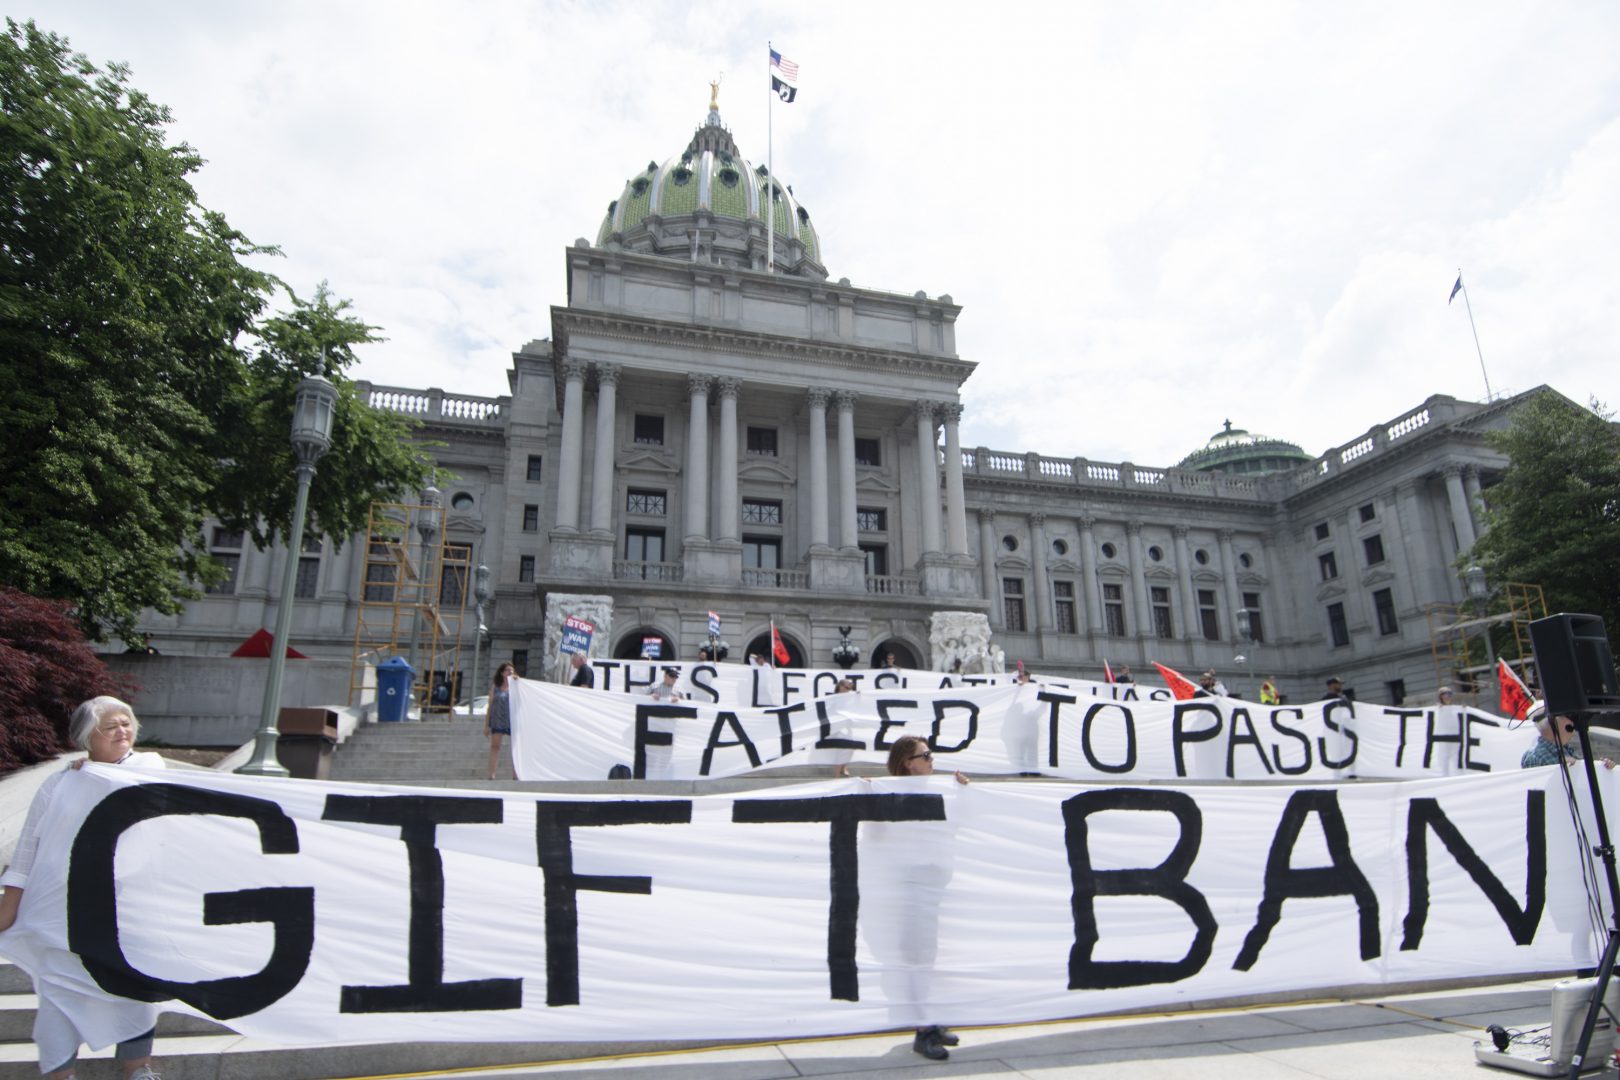 Demonstrators from MarchOnHarrisburg stand outside Pennsylvania’s Capitol to press lawmakers to pass legislation banning them from taking gifts from lobbyists and others aiming to influence them, Wednesday, June 9, 2021, in Harrisburg, Pa. The Pennsylvania Legislature does not limit how much lawmakers can accept from lobbyists and others seeking to influence them.